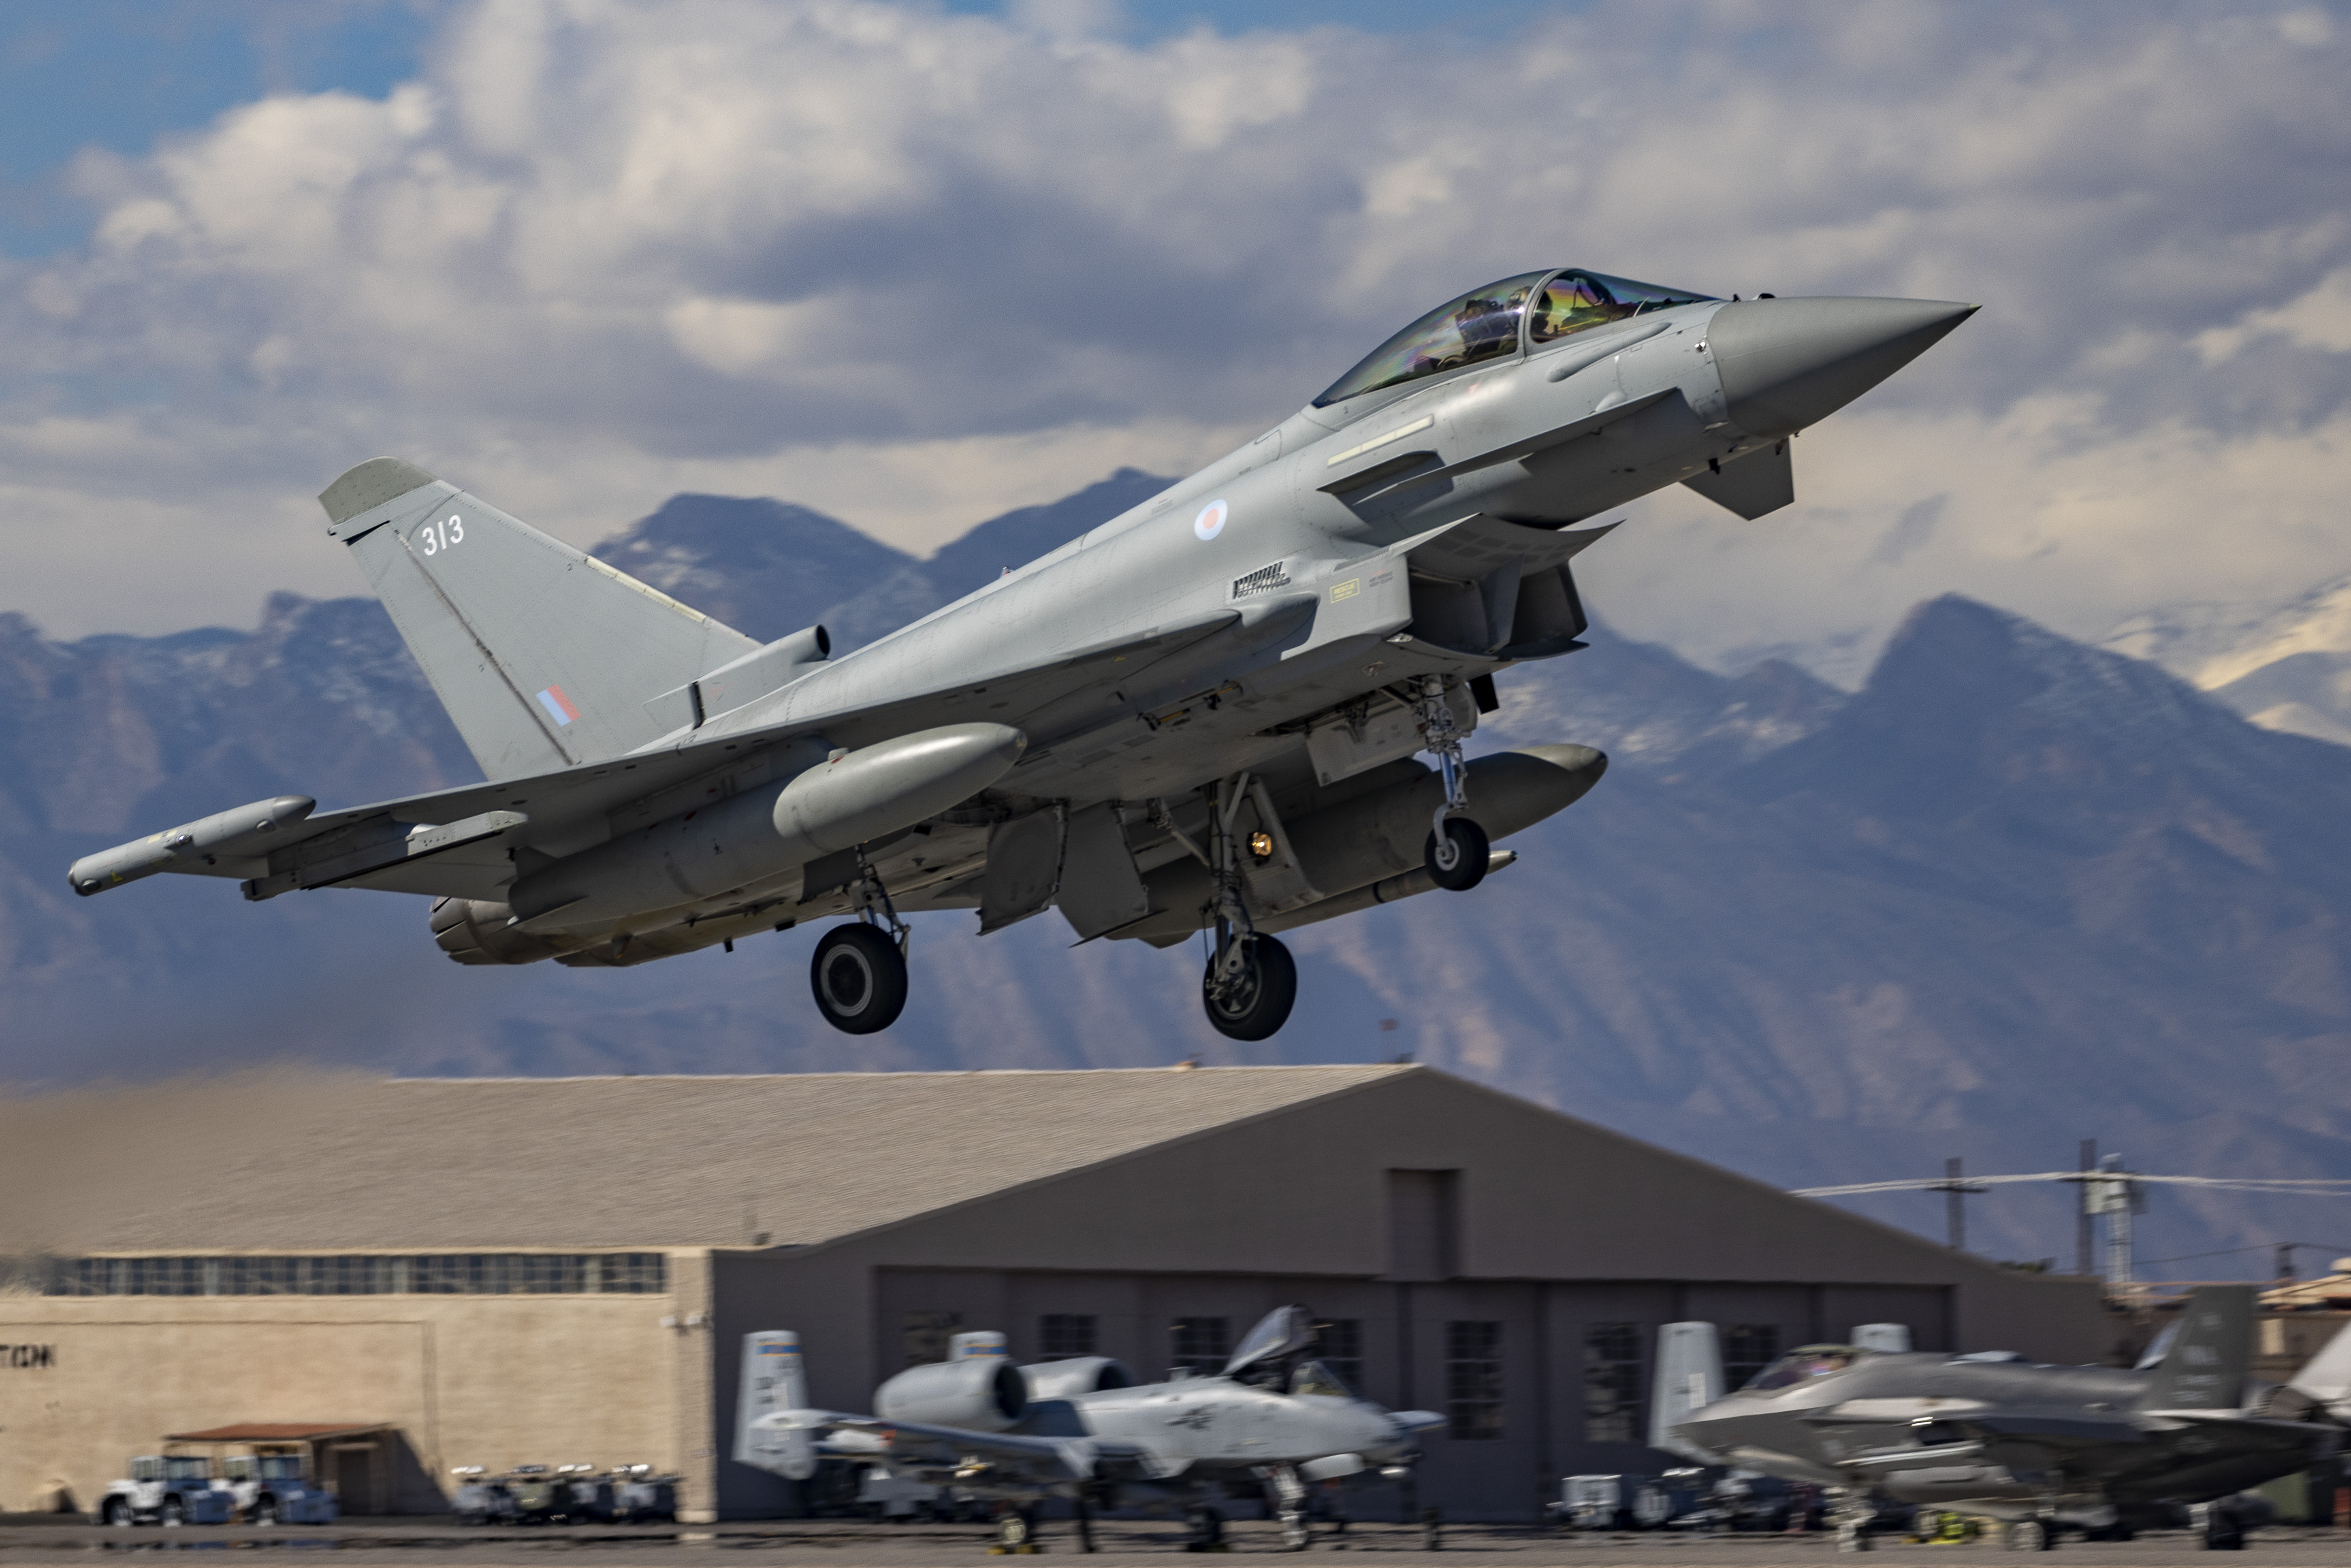 Image shows RAF Typhoon aircraft taking off from the airfield.